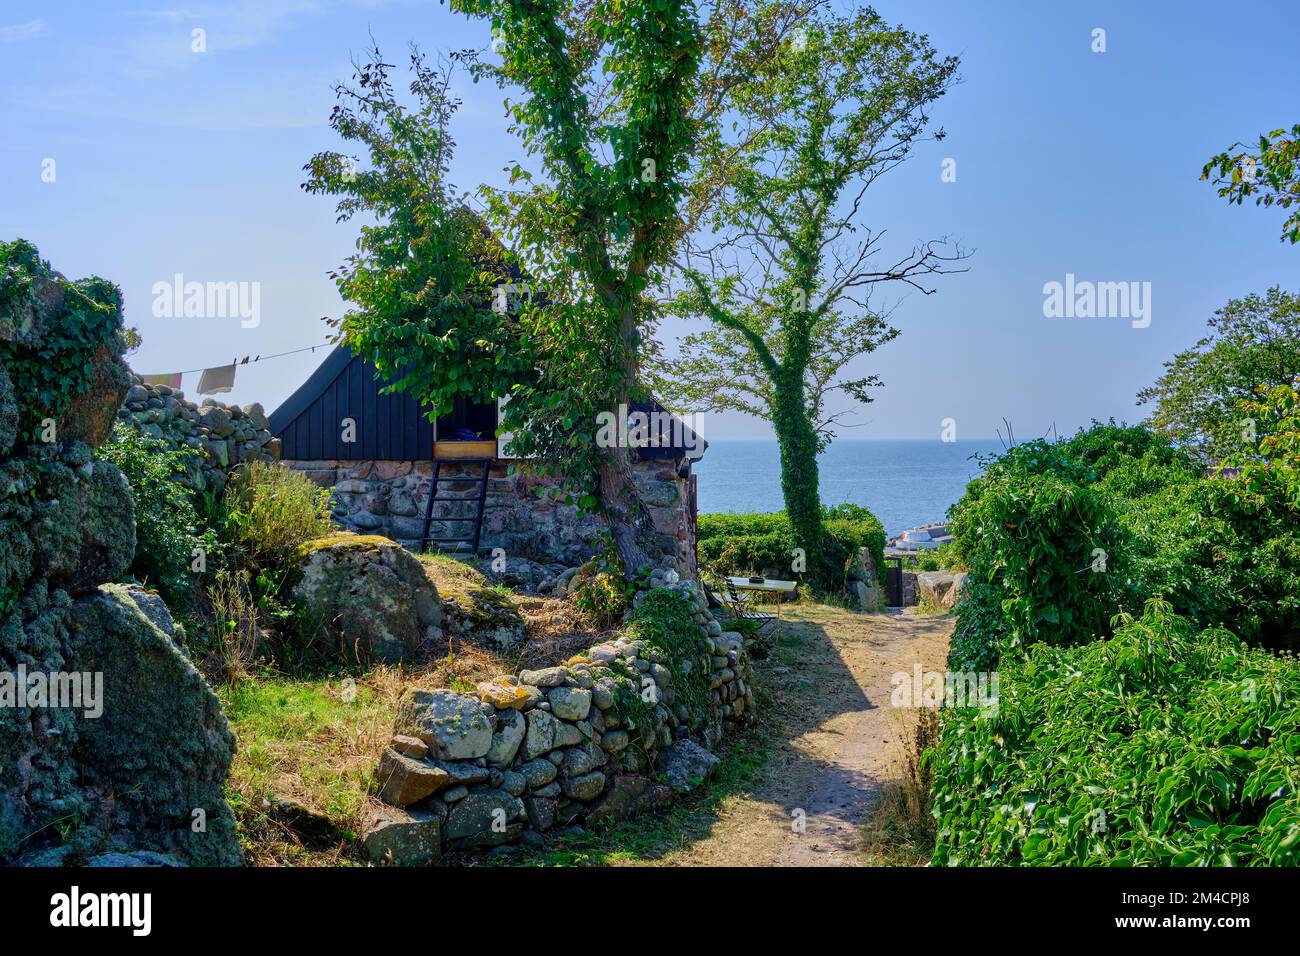 Out and about on the Ertholmen islands, still in use today, historical residential structure of little cottages on Christiansö, Ertholmene, Denmark. Stock Photo